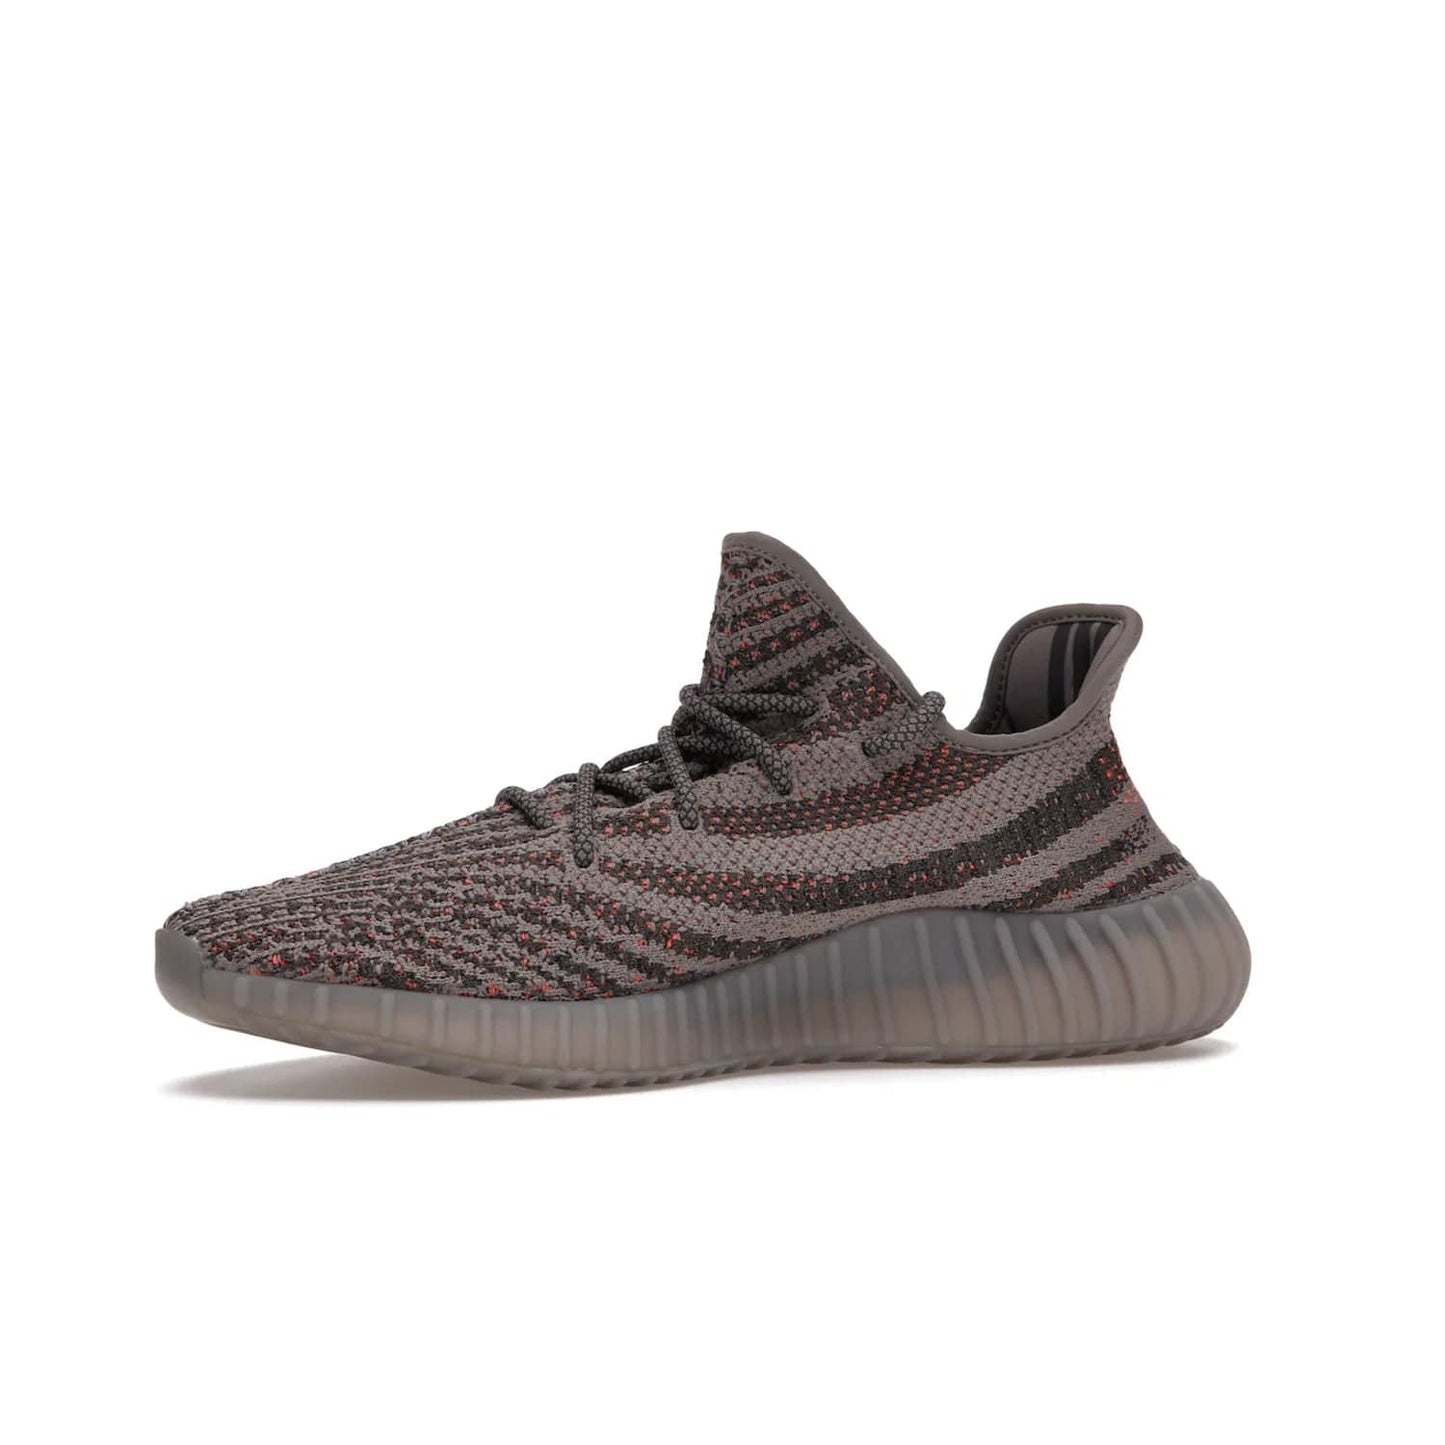 adidas Yeezy Boost 350 V2 Beluga Reflective - Image 17 - Only at www.BallersClubKickz.com - Shop the adidas Yeezy Boost 350 V2 Beluga Reflective: a stylish, reflective sneaker that stands out. Featuring Boost sole, Primeknit upper & signature orange stripe. Available Dec 2021.